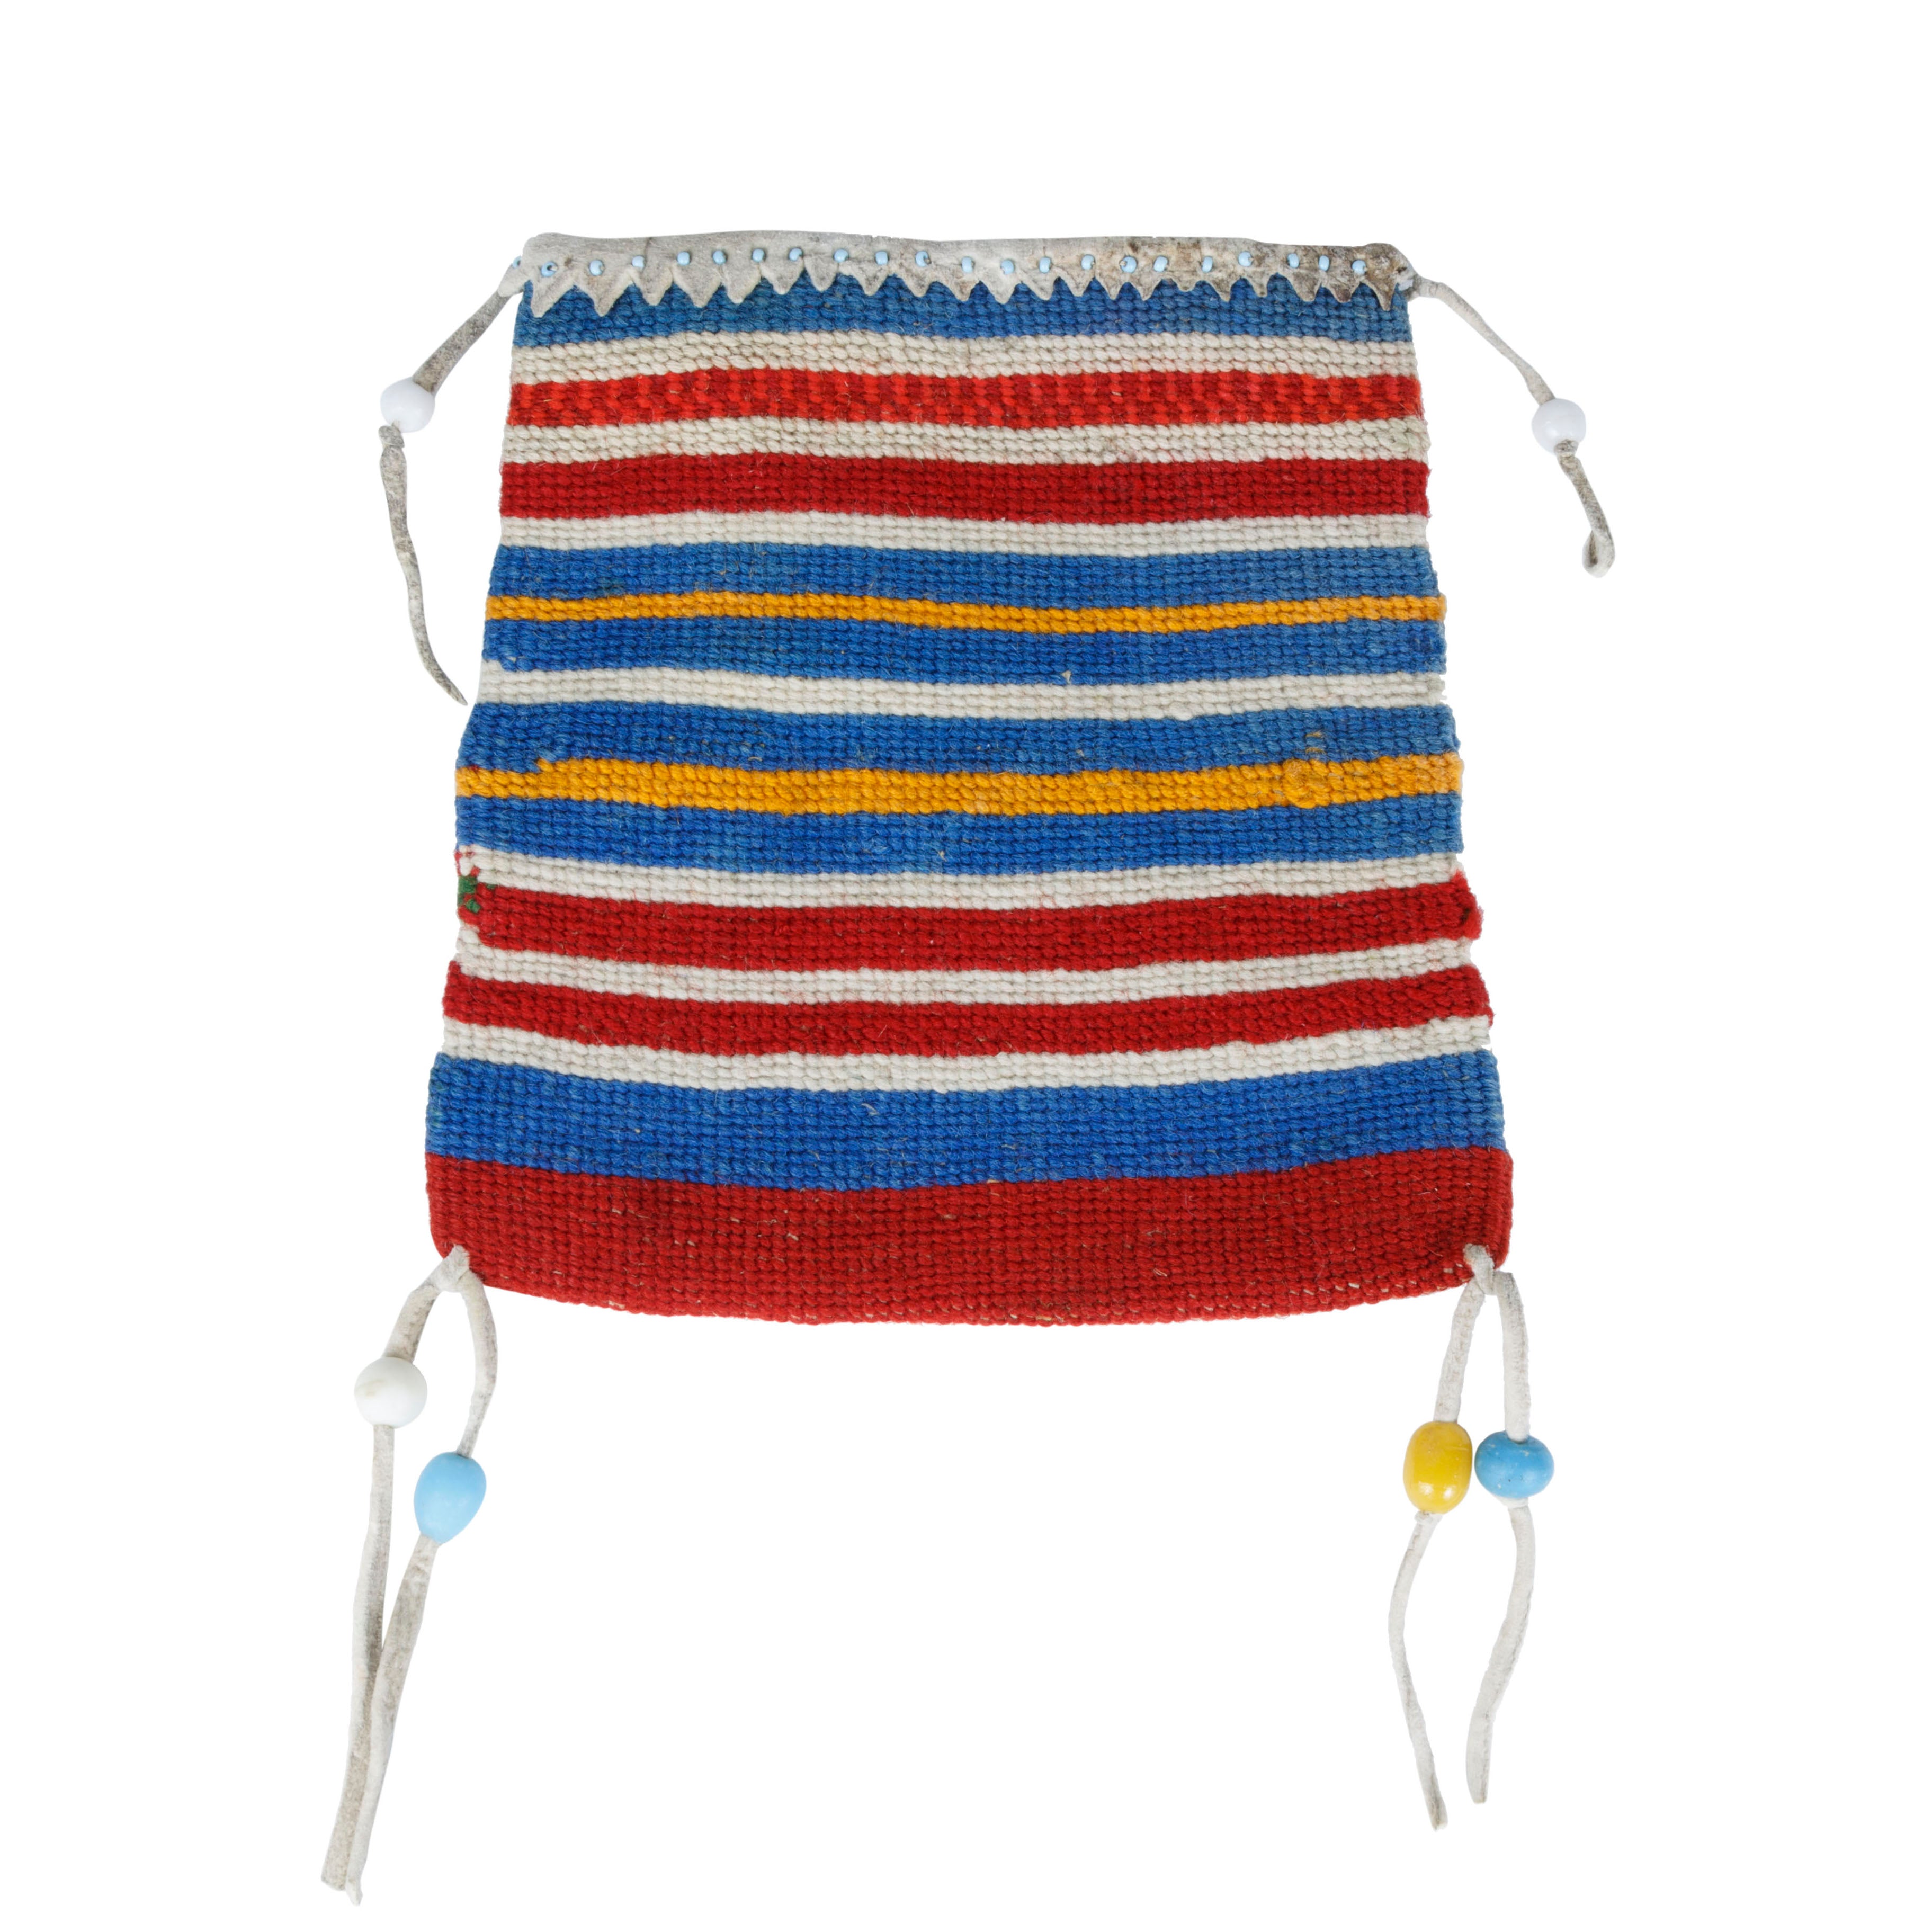 Nez Perce Embroidered Flat Bags